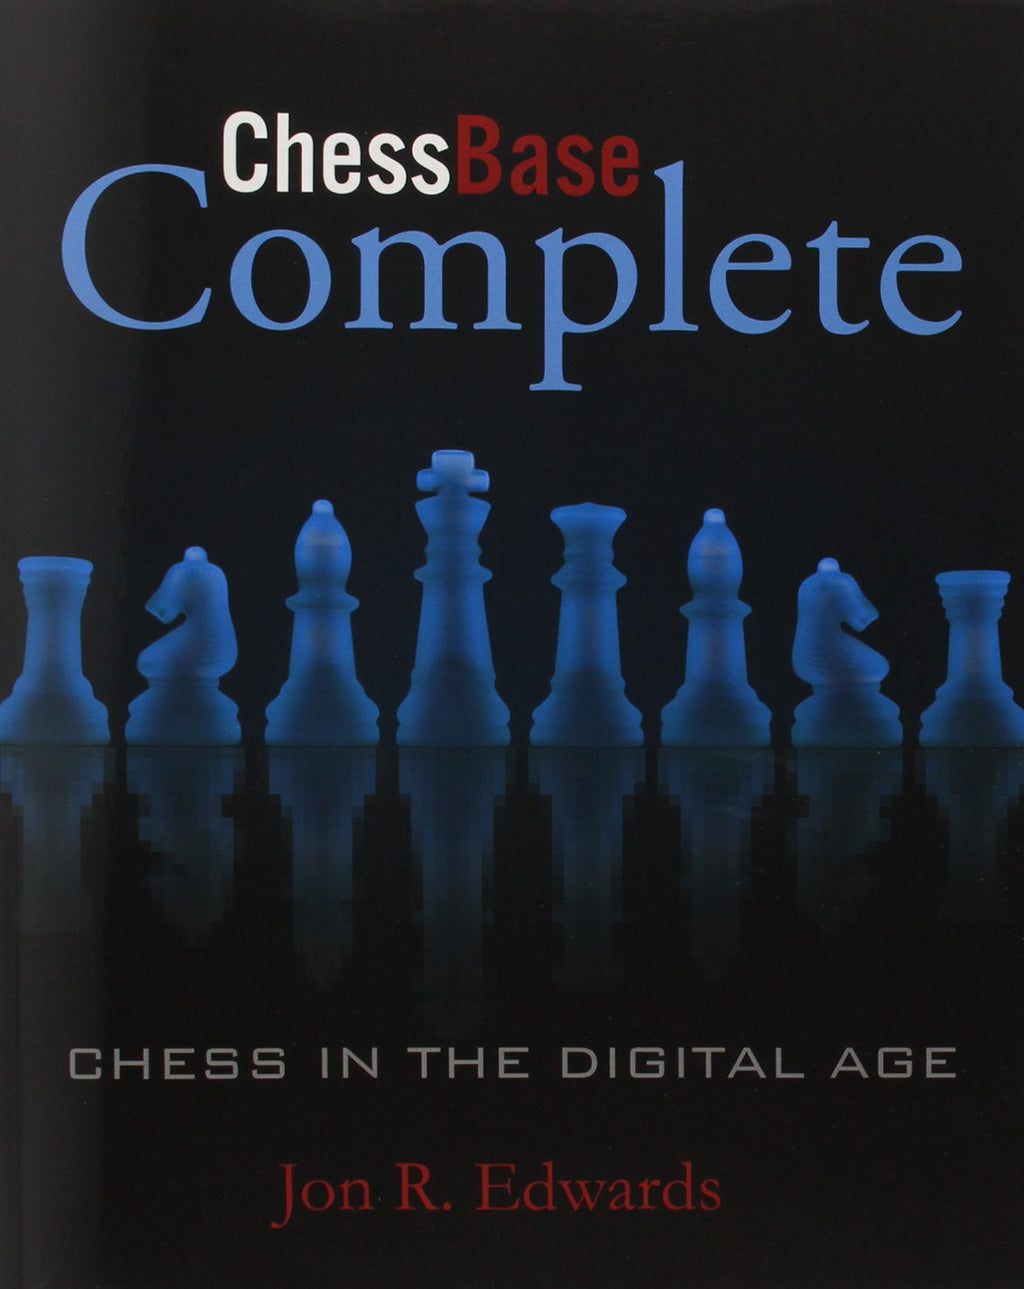 ChessBase India - As chess players, we all have faced the